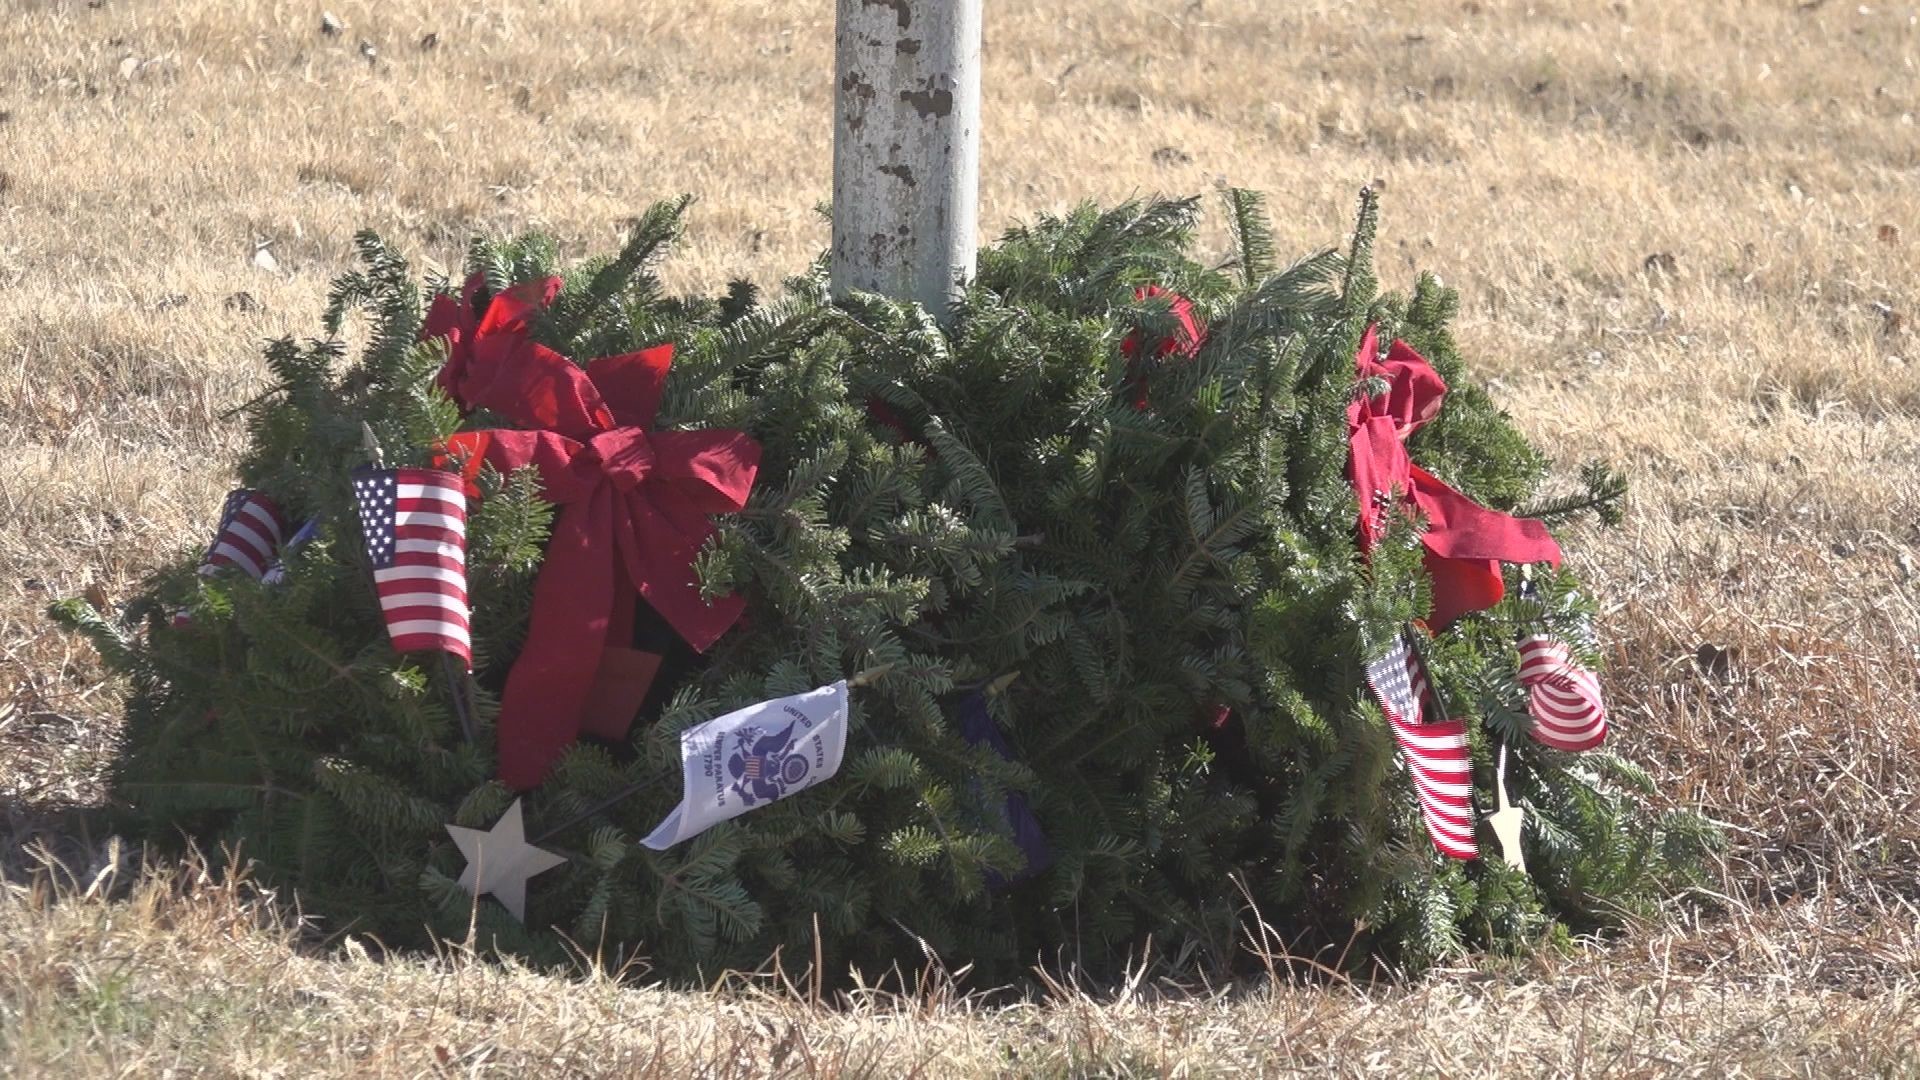 Permian Basin D.A.R. Chapter places wreaths on veterans' graves in Andrews for Wreaths Across America Day.